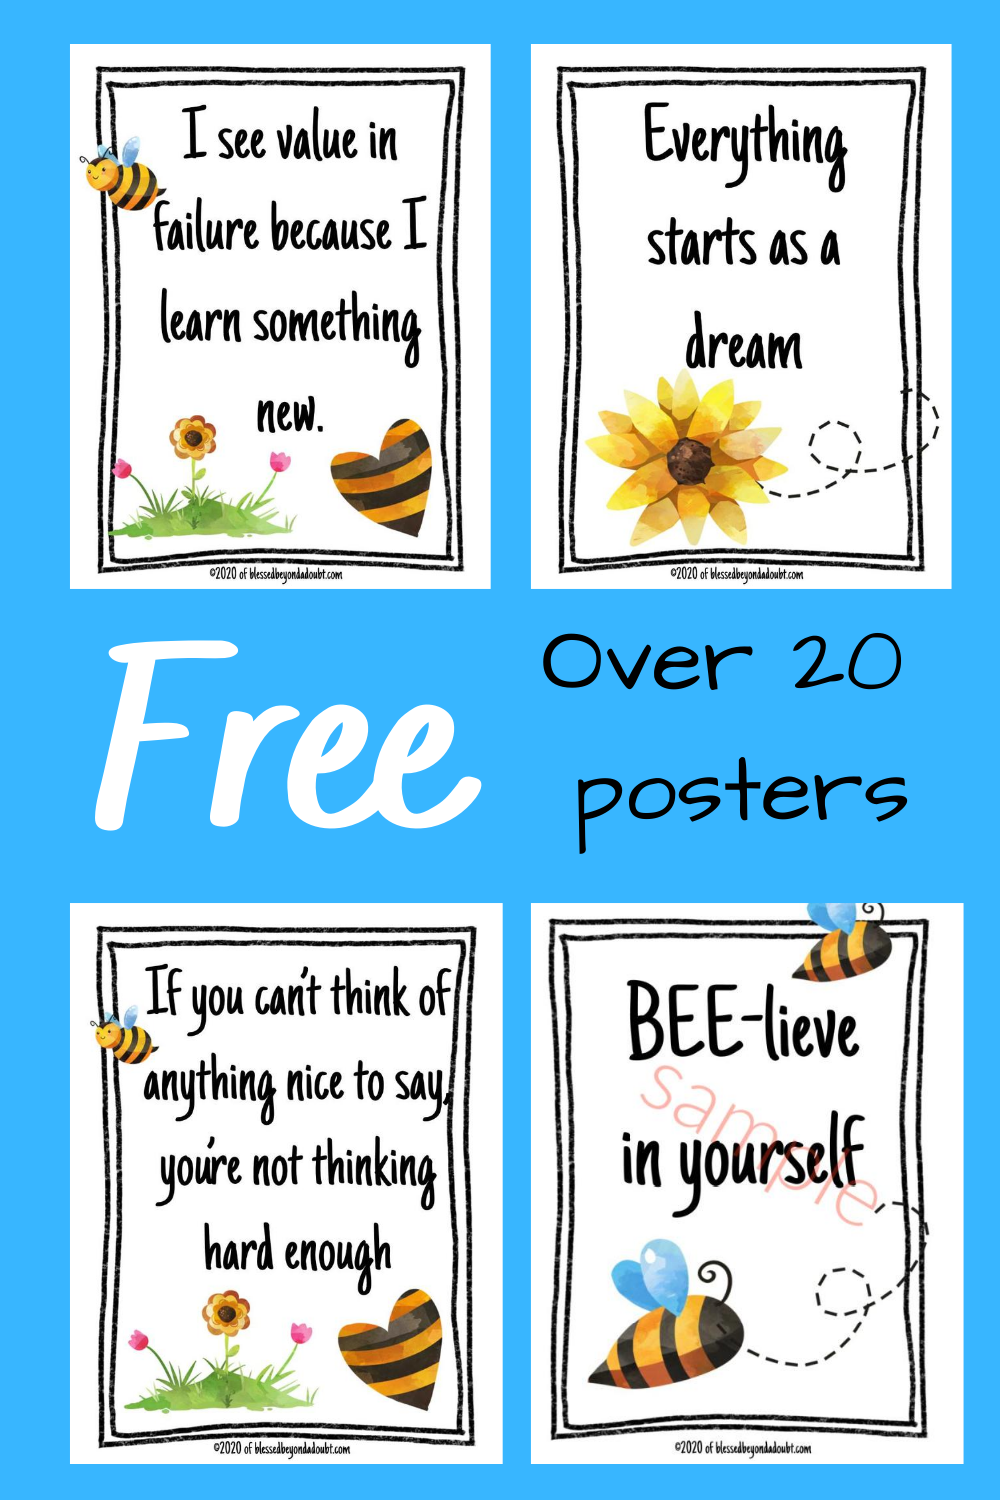 Here are 2 sets of FREE Growth Mindset Posters for classroom. There are over 20 different encouraging quotes. Pick and choose which ones work in your classroom. #growthmindset #growthmindsetquotes #growthmindsetactivities #growthmindsetbulletinboard #growthmindsetbulletinboardfree #growthmindsetquotes #growthmindsetquotesforkids #growthmindsetquotesforkidsposter #growthmindsetbulletinboard